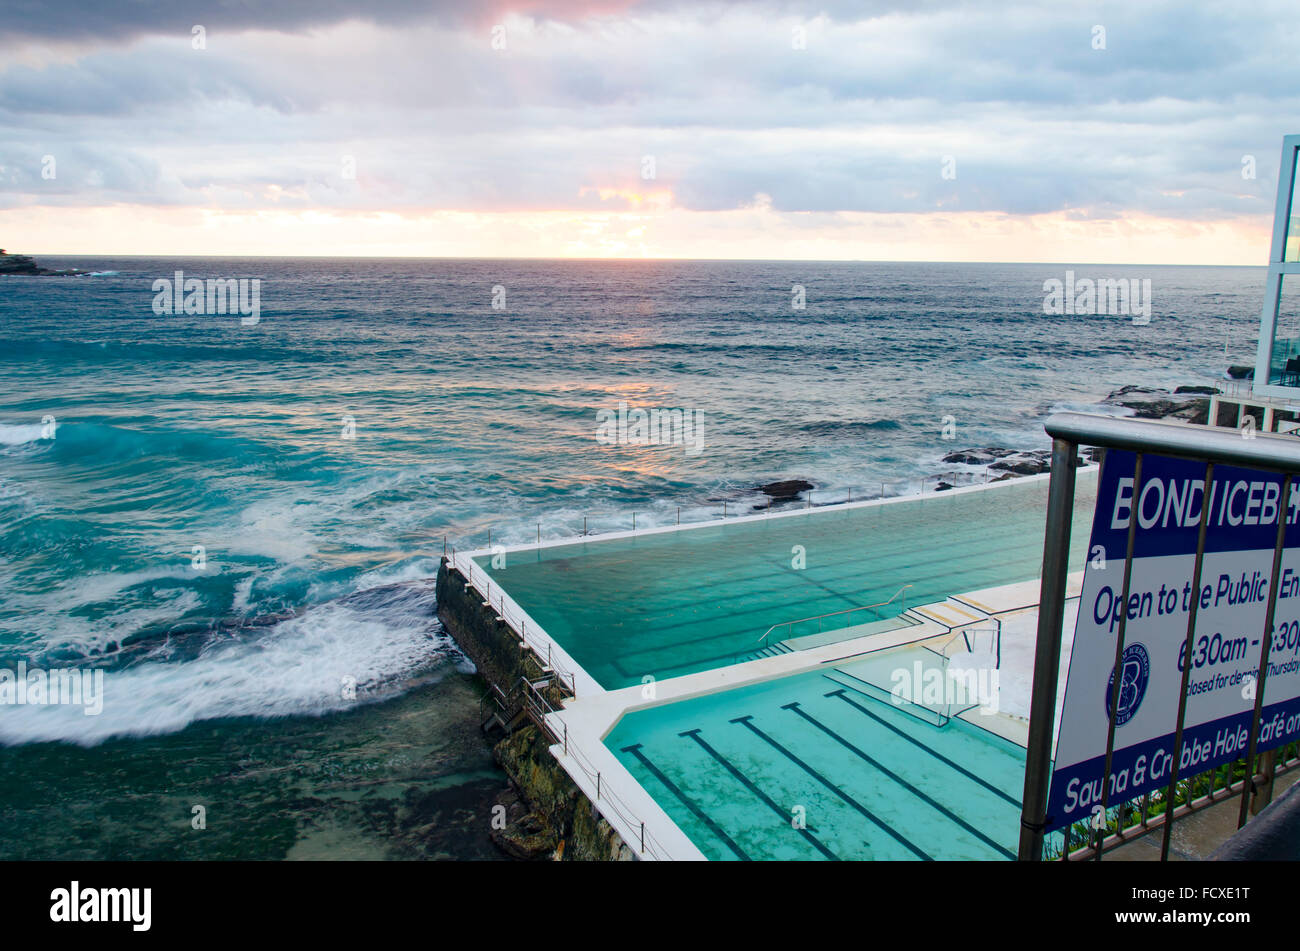 Bondi Beach, Sydney, Australia. 26th Jan, 2016. Sunrise over Sydneys Bondi Beach and Bondi Icebergs pool. Despite being the height of summer, January in Sydney and surrounding regions have experienced record breaking rainfall with more forecast today. Sydney has already received 225 mm of rain in January which is more than double the long term average. Credit:  Sydney Photographer/Alamy Live News Stock Photo